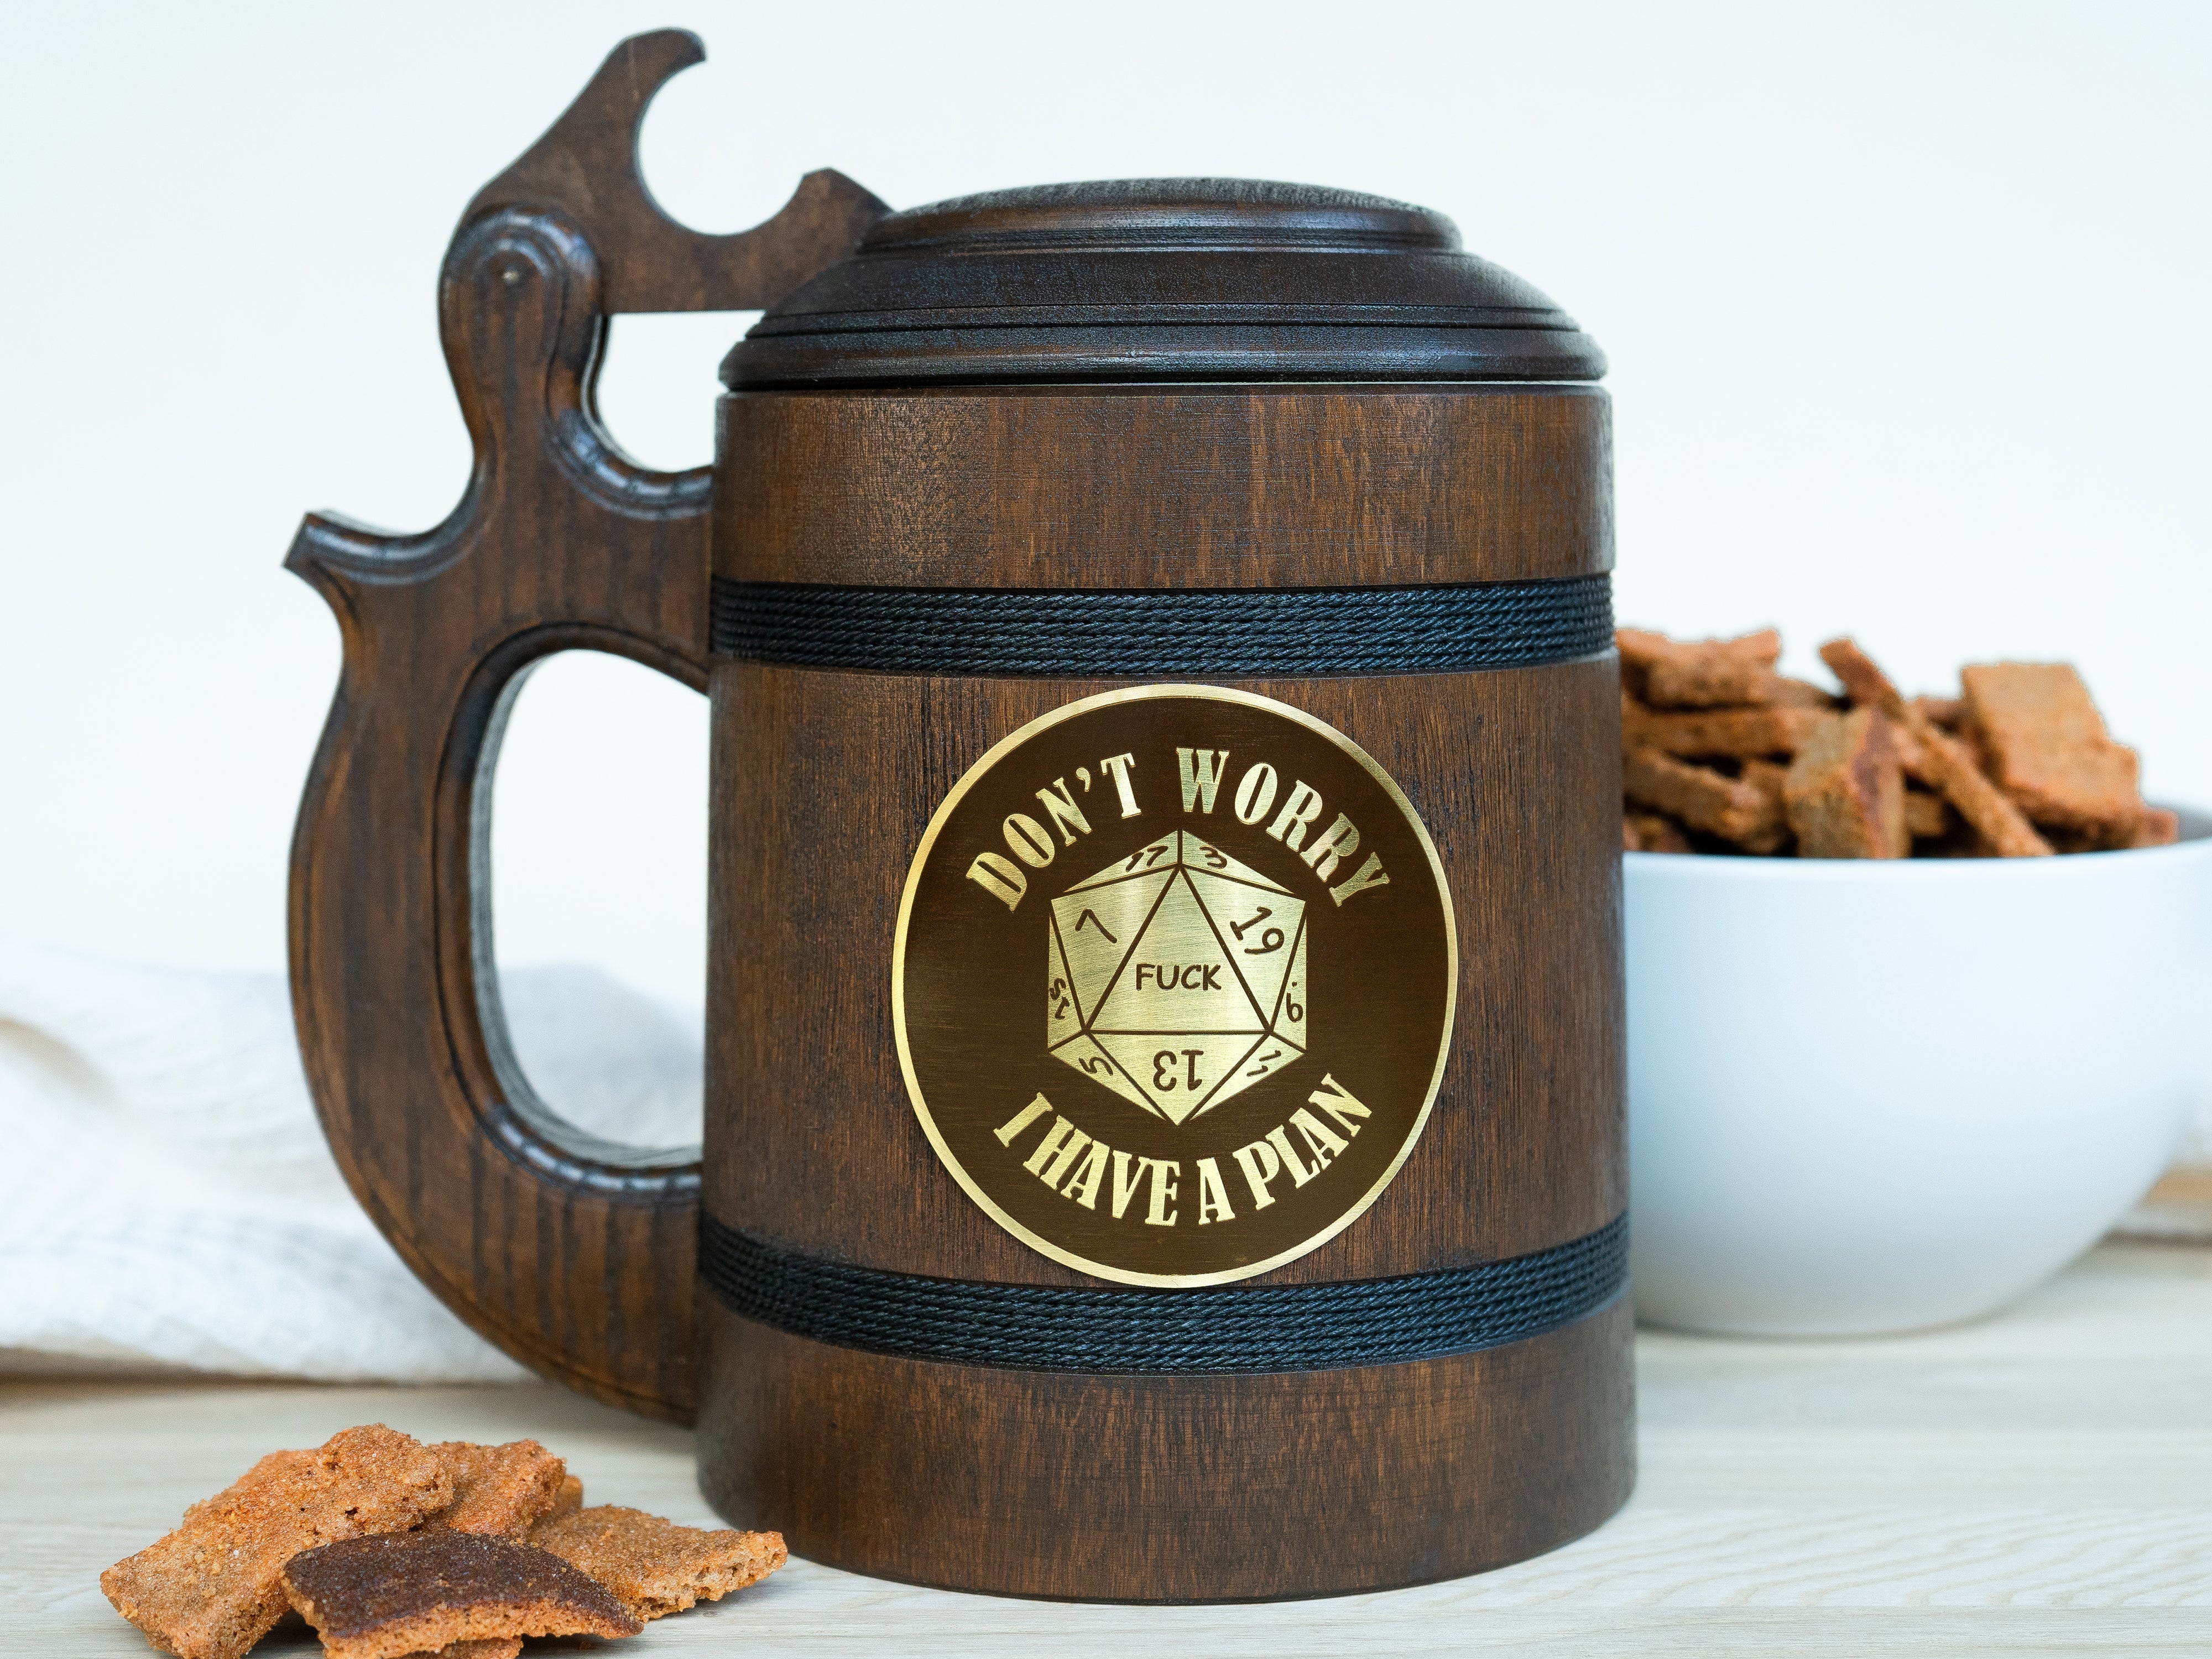 DnD wood mug with lid "Don't worry I have a plan", DND Mugs - GravisCup